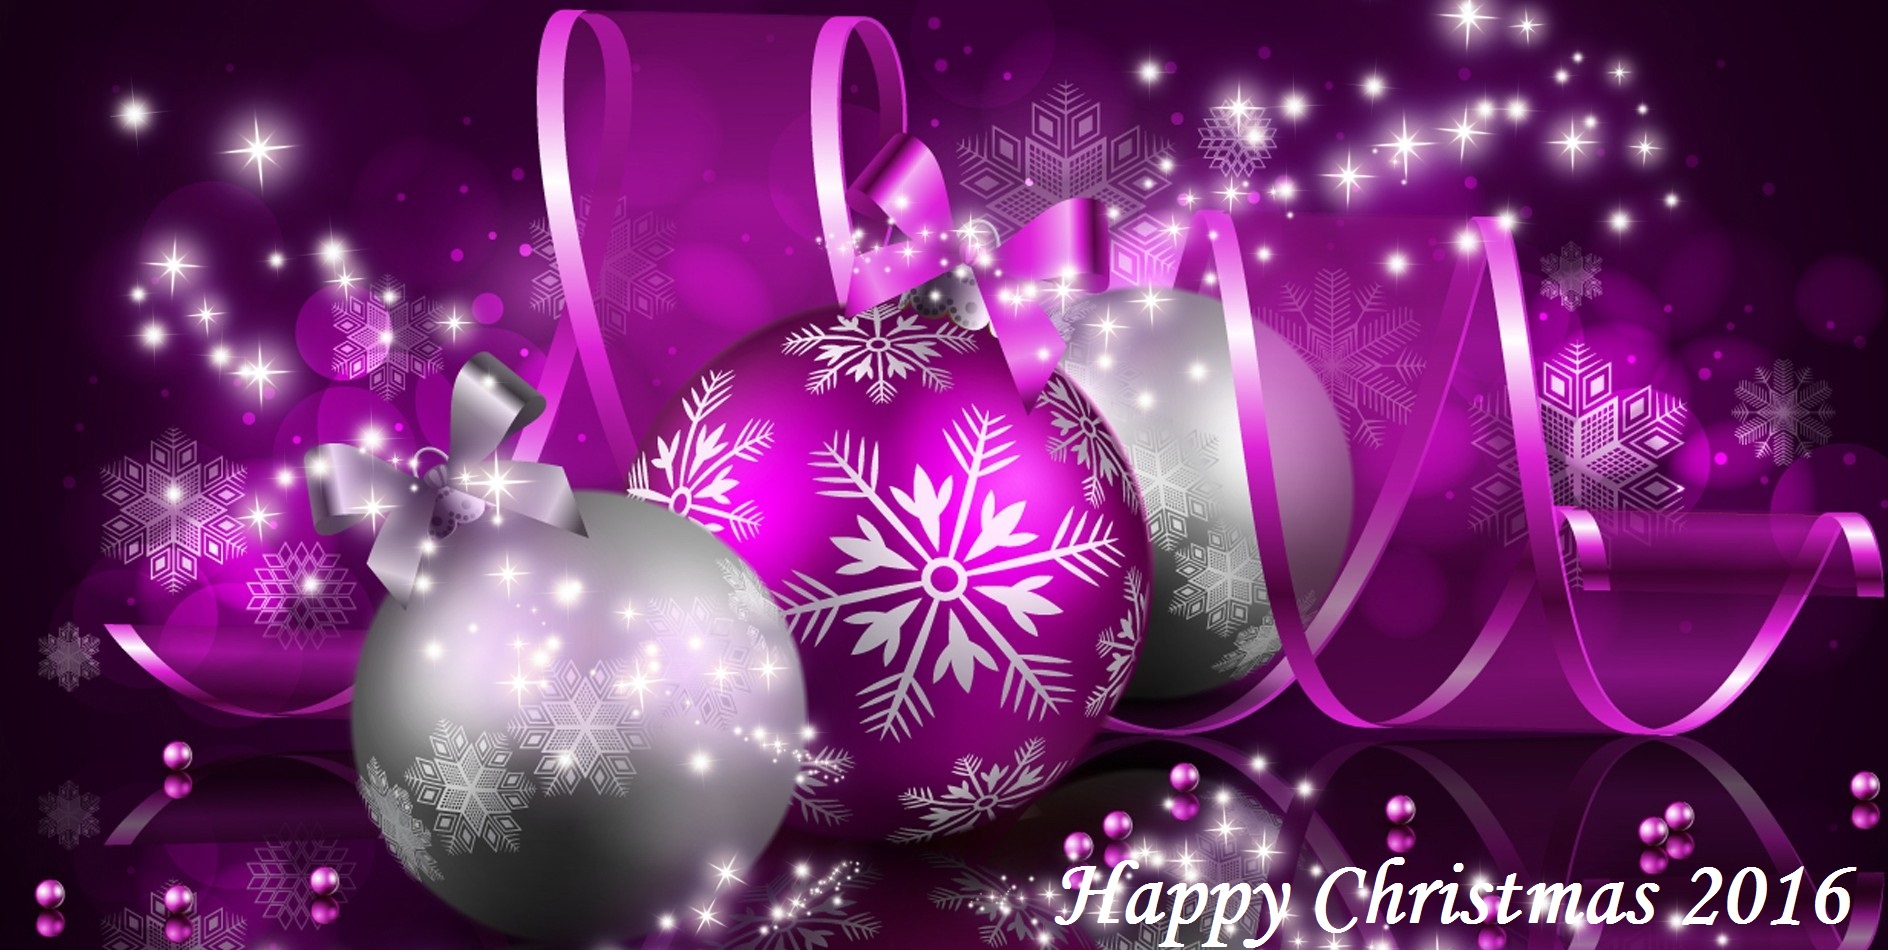 merry christmas wishes 2016 image